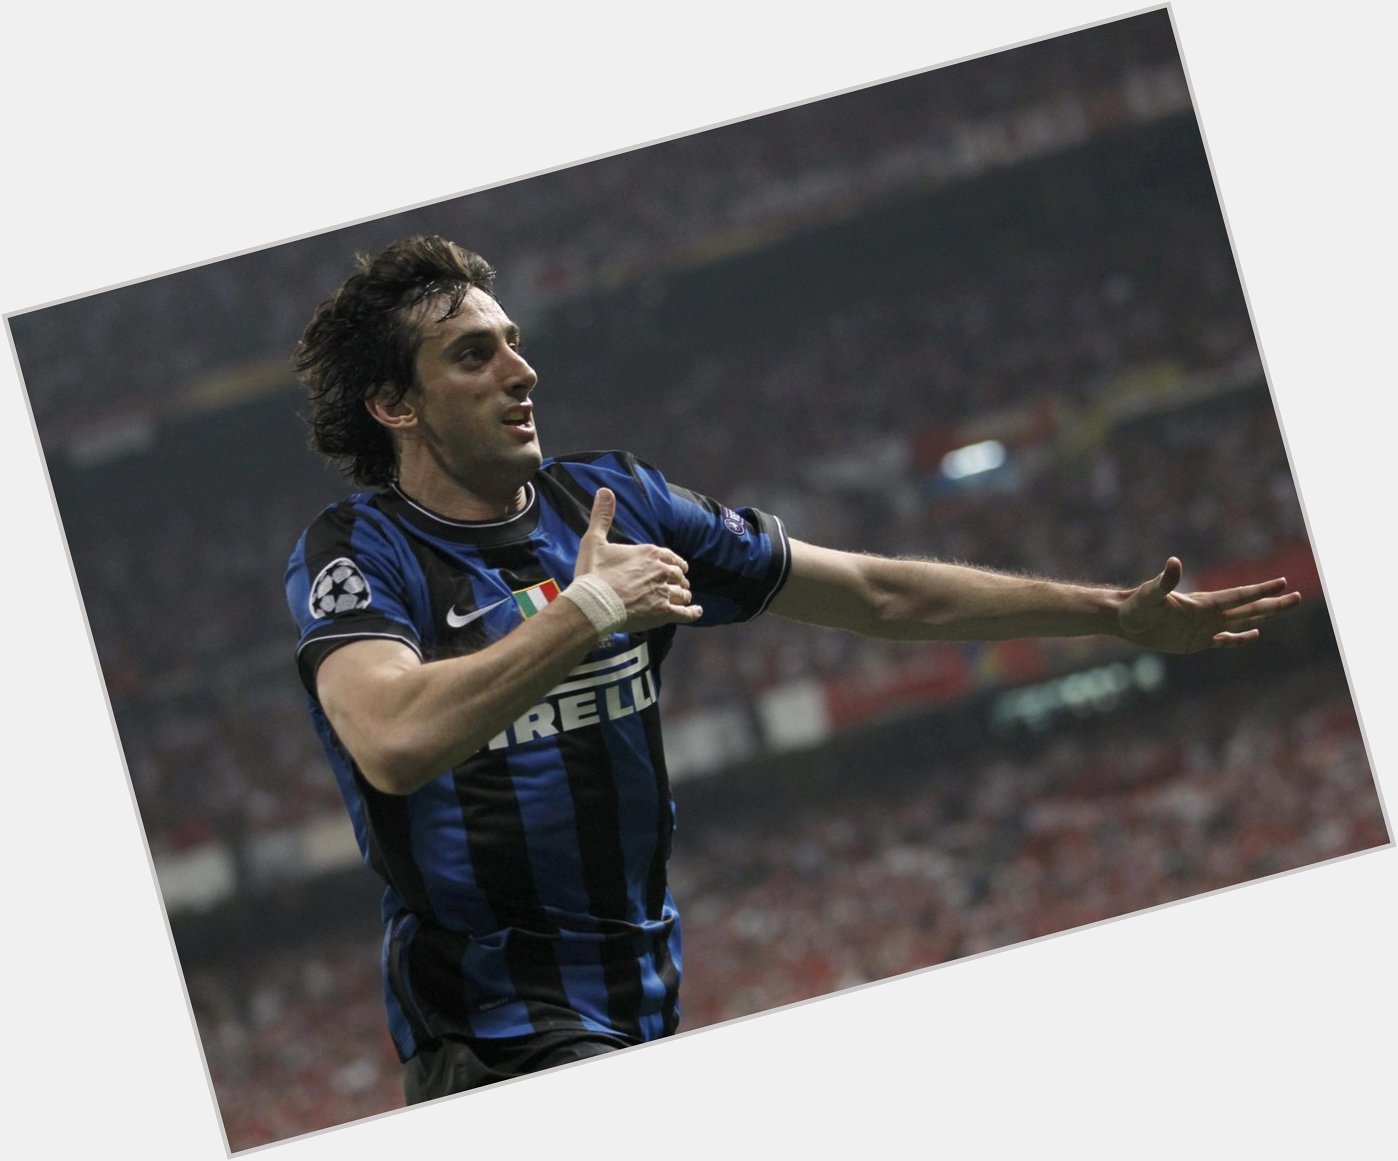 Happy 36th birthday to Diego Milito. He scored 256 goals in 613 games during his career. Born goalscorer. 